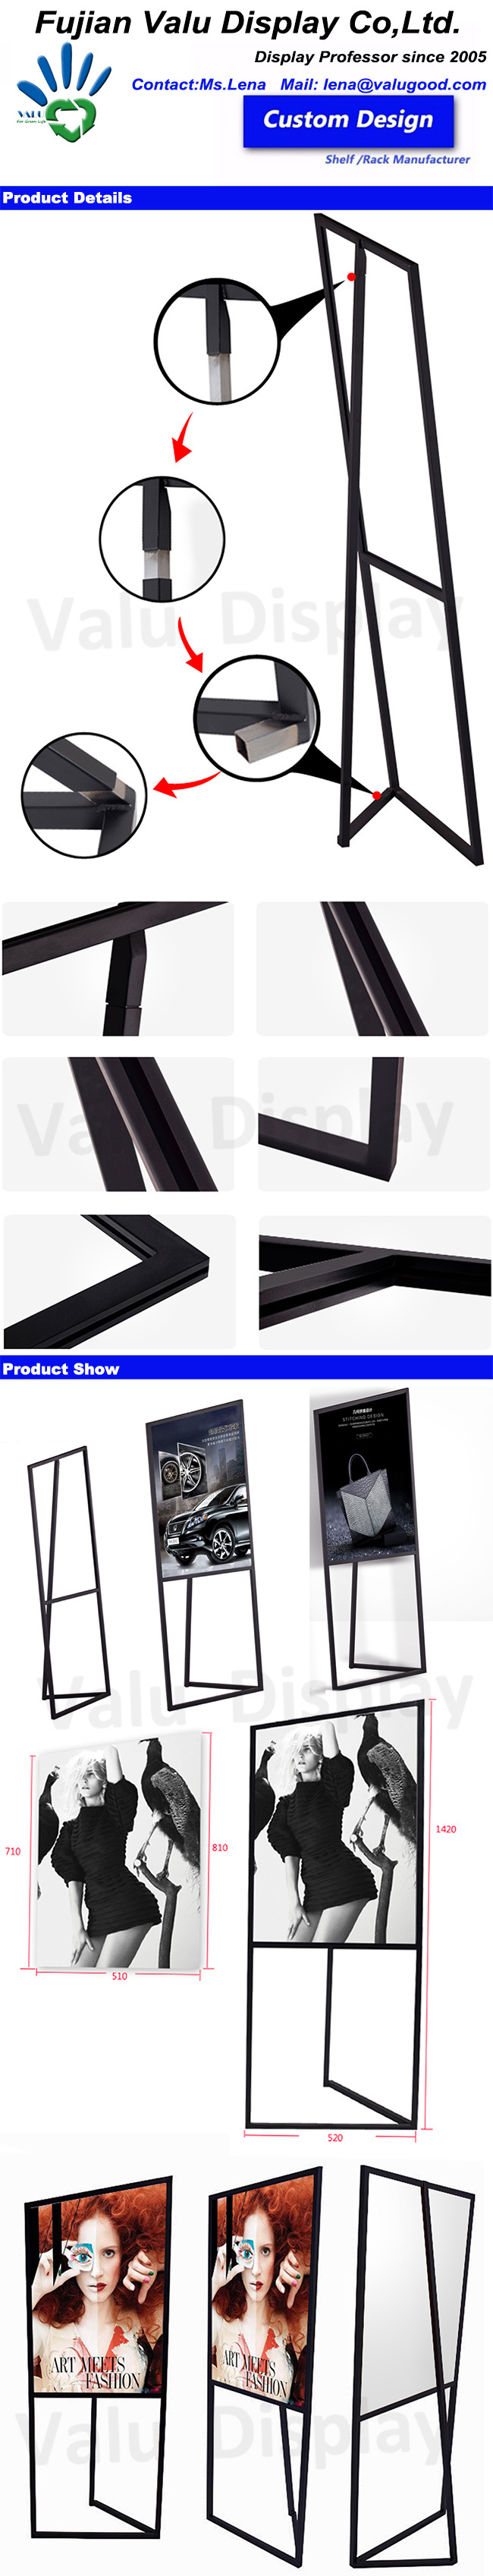 Metal Poster Display Rack for Shopping Mall/Supermarket